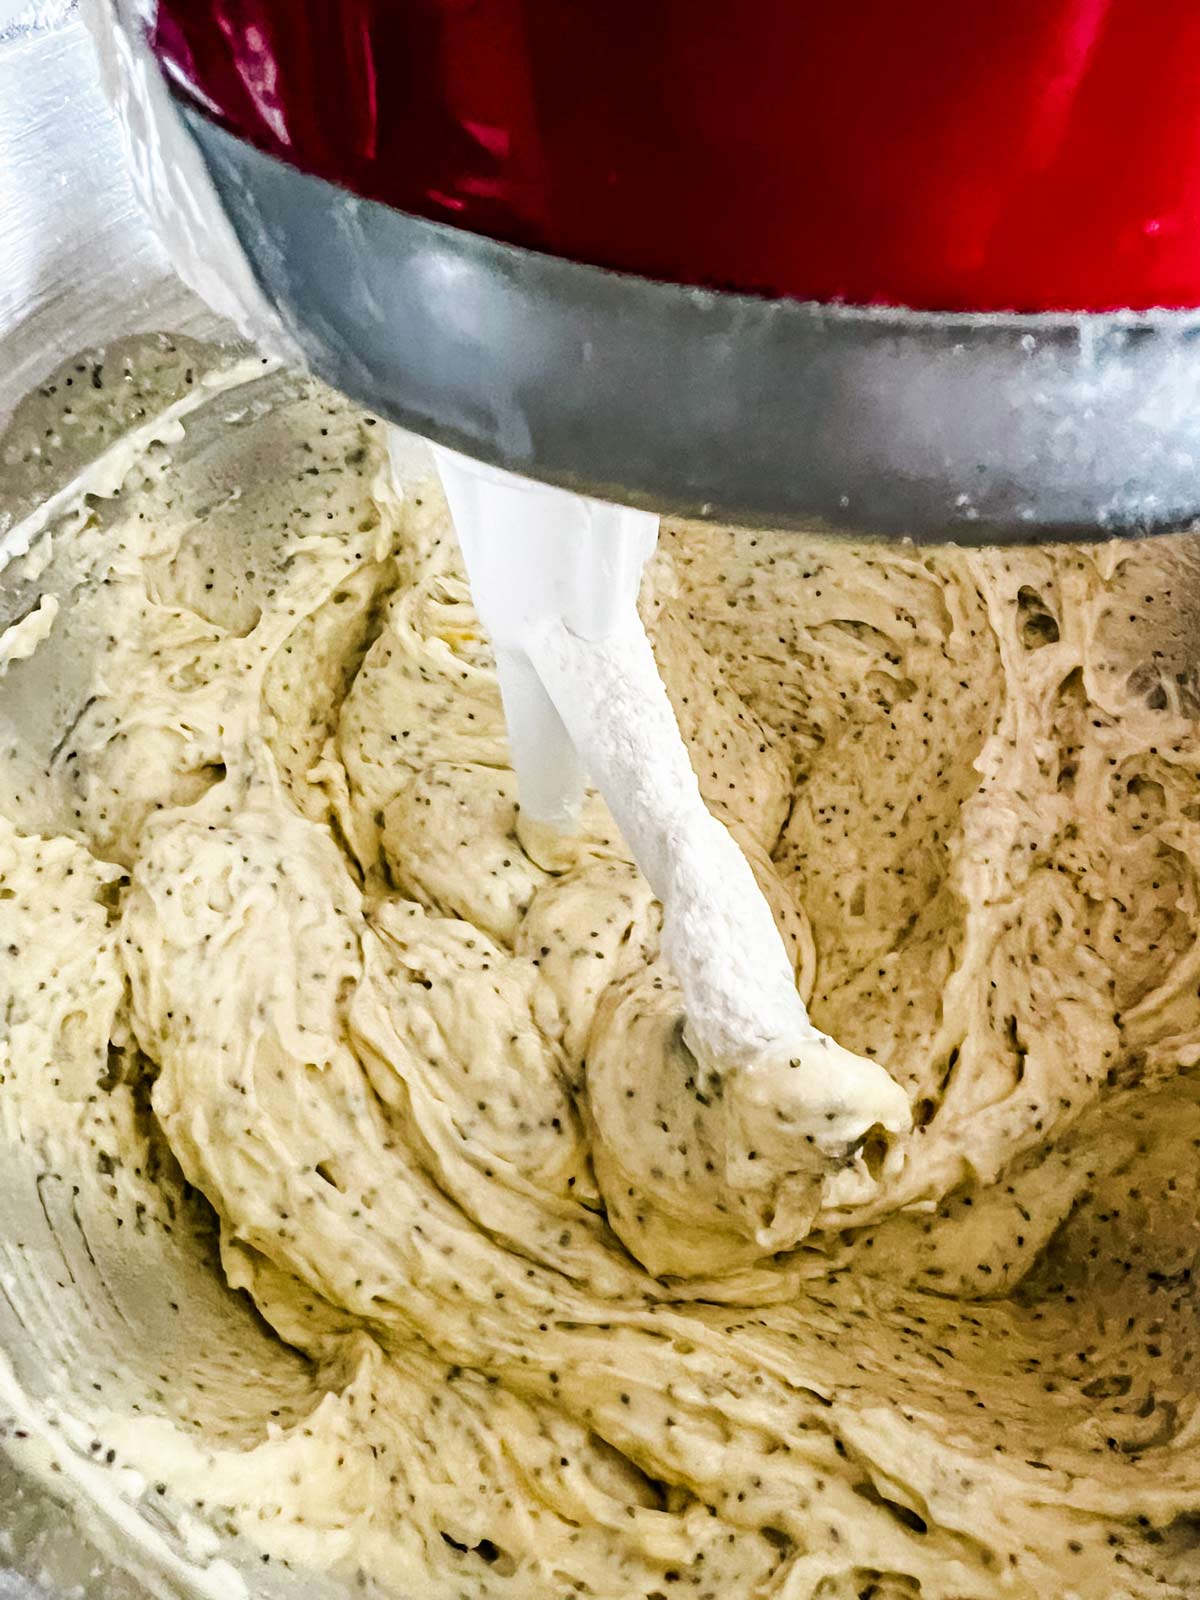 Lemon loaf batter being finished up in a  red KitchenAid stand mixer.